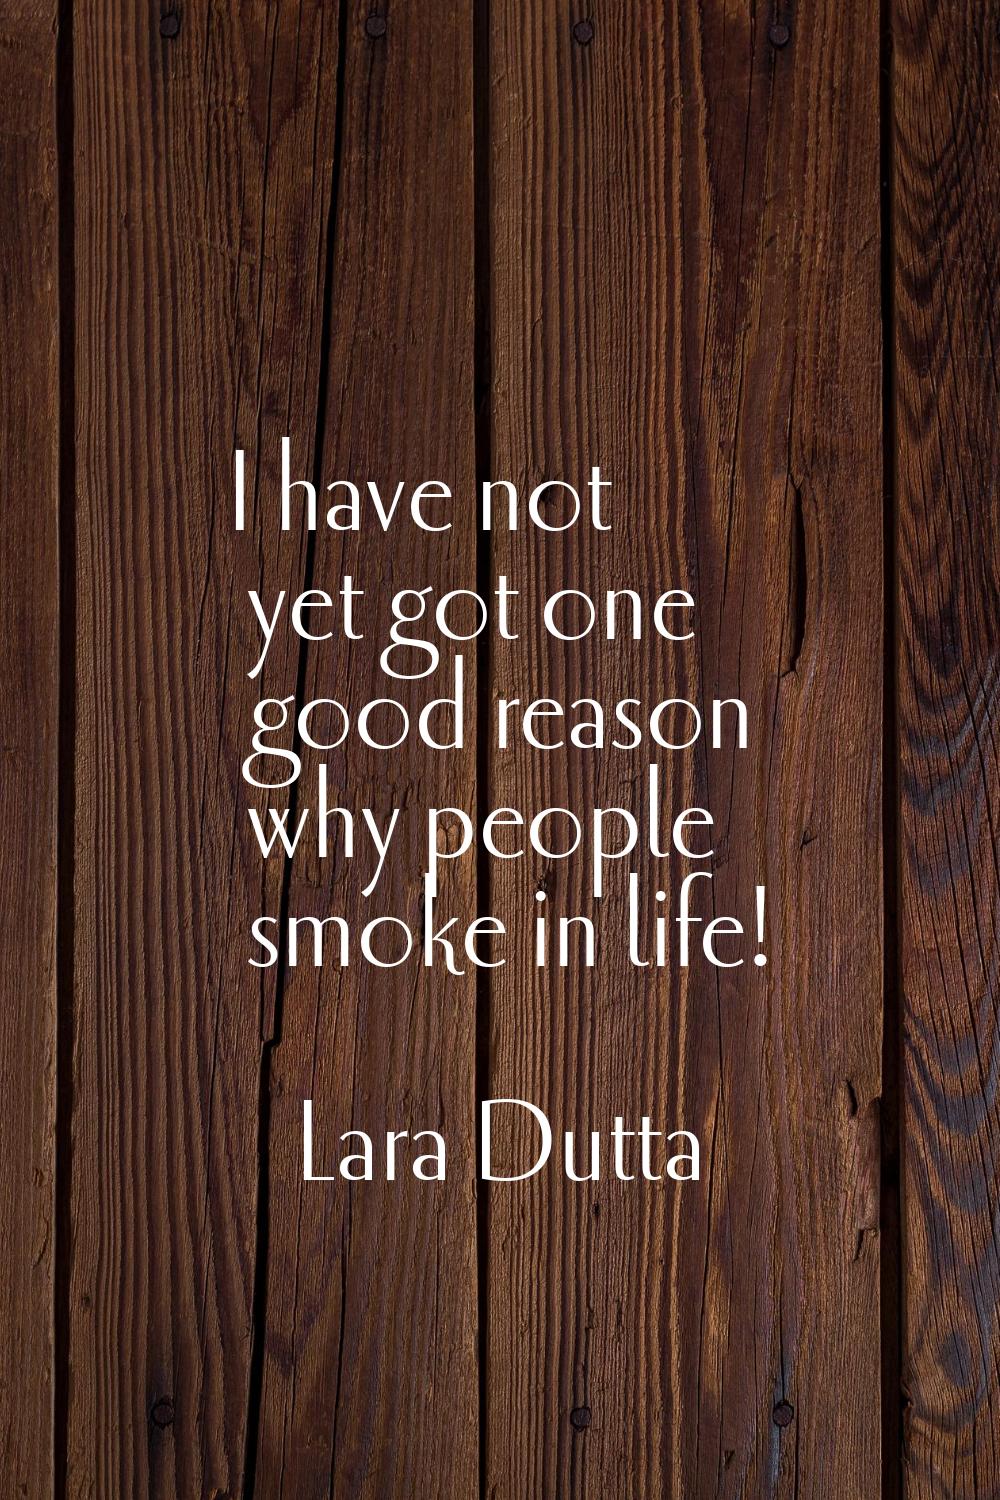 I have not yet got one good reason why people smoke in life!